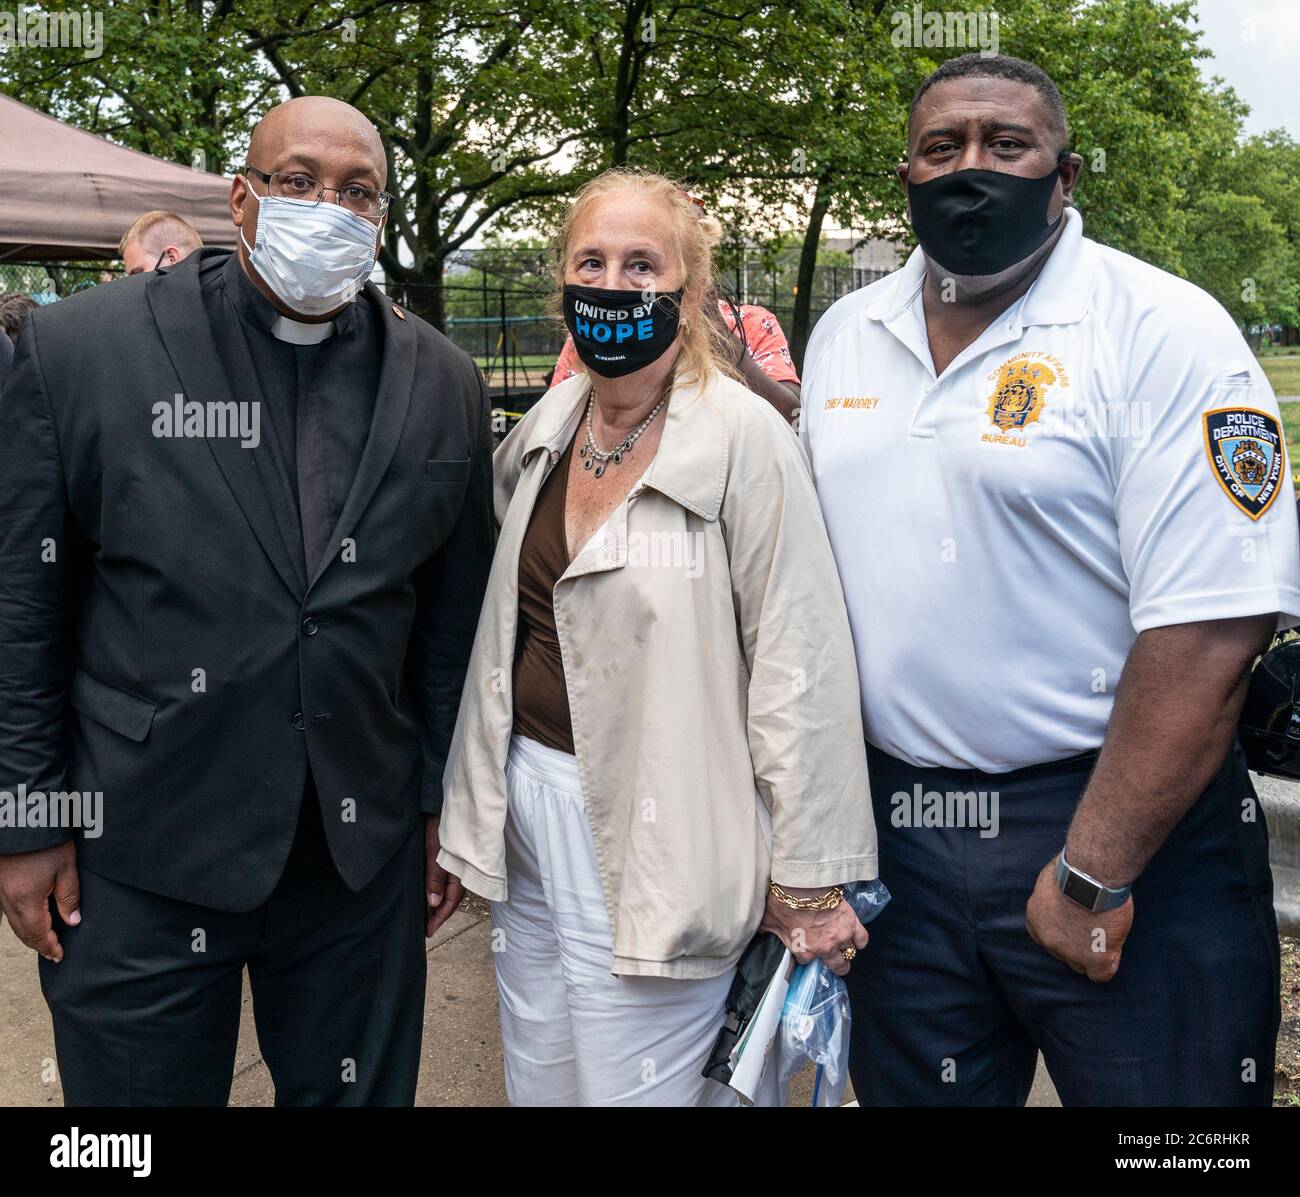 New York, NY - July 11, 2020: Chaplain Robert Rice, Gale Brewer, NYPD Chief Jeffrey Maddrey attend Occupy the Corner rally in East Harlem in response on gun violence Stock Photo